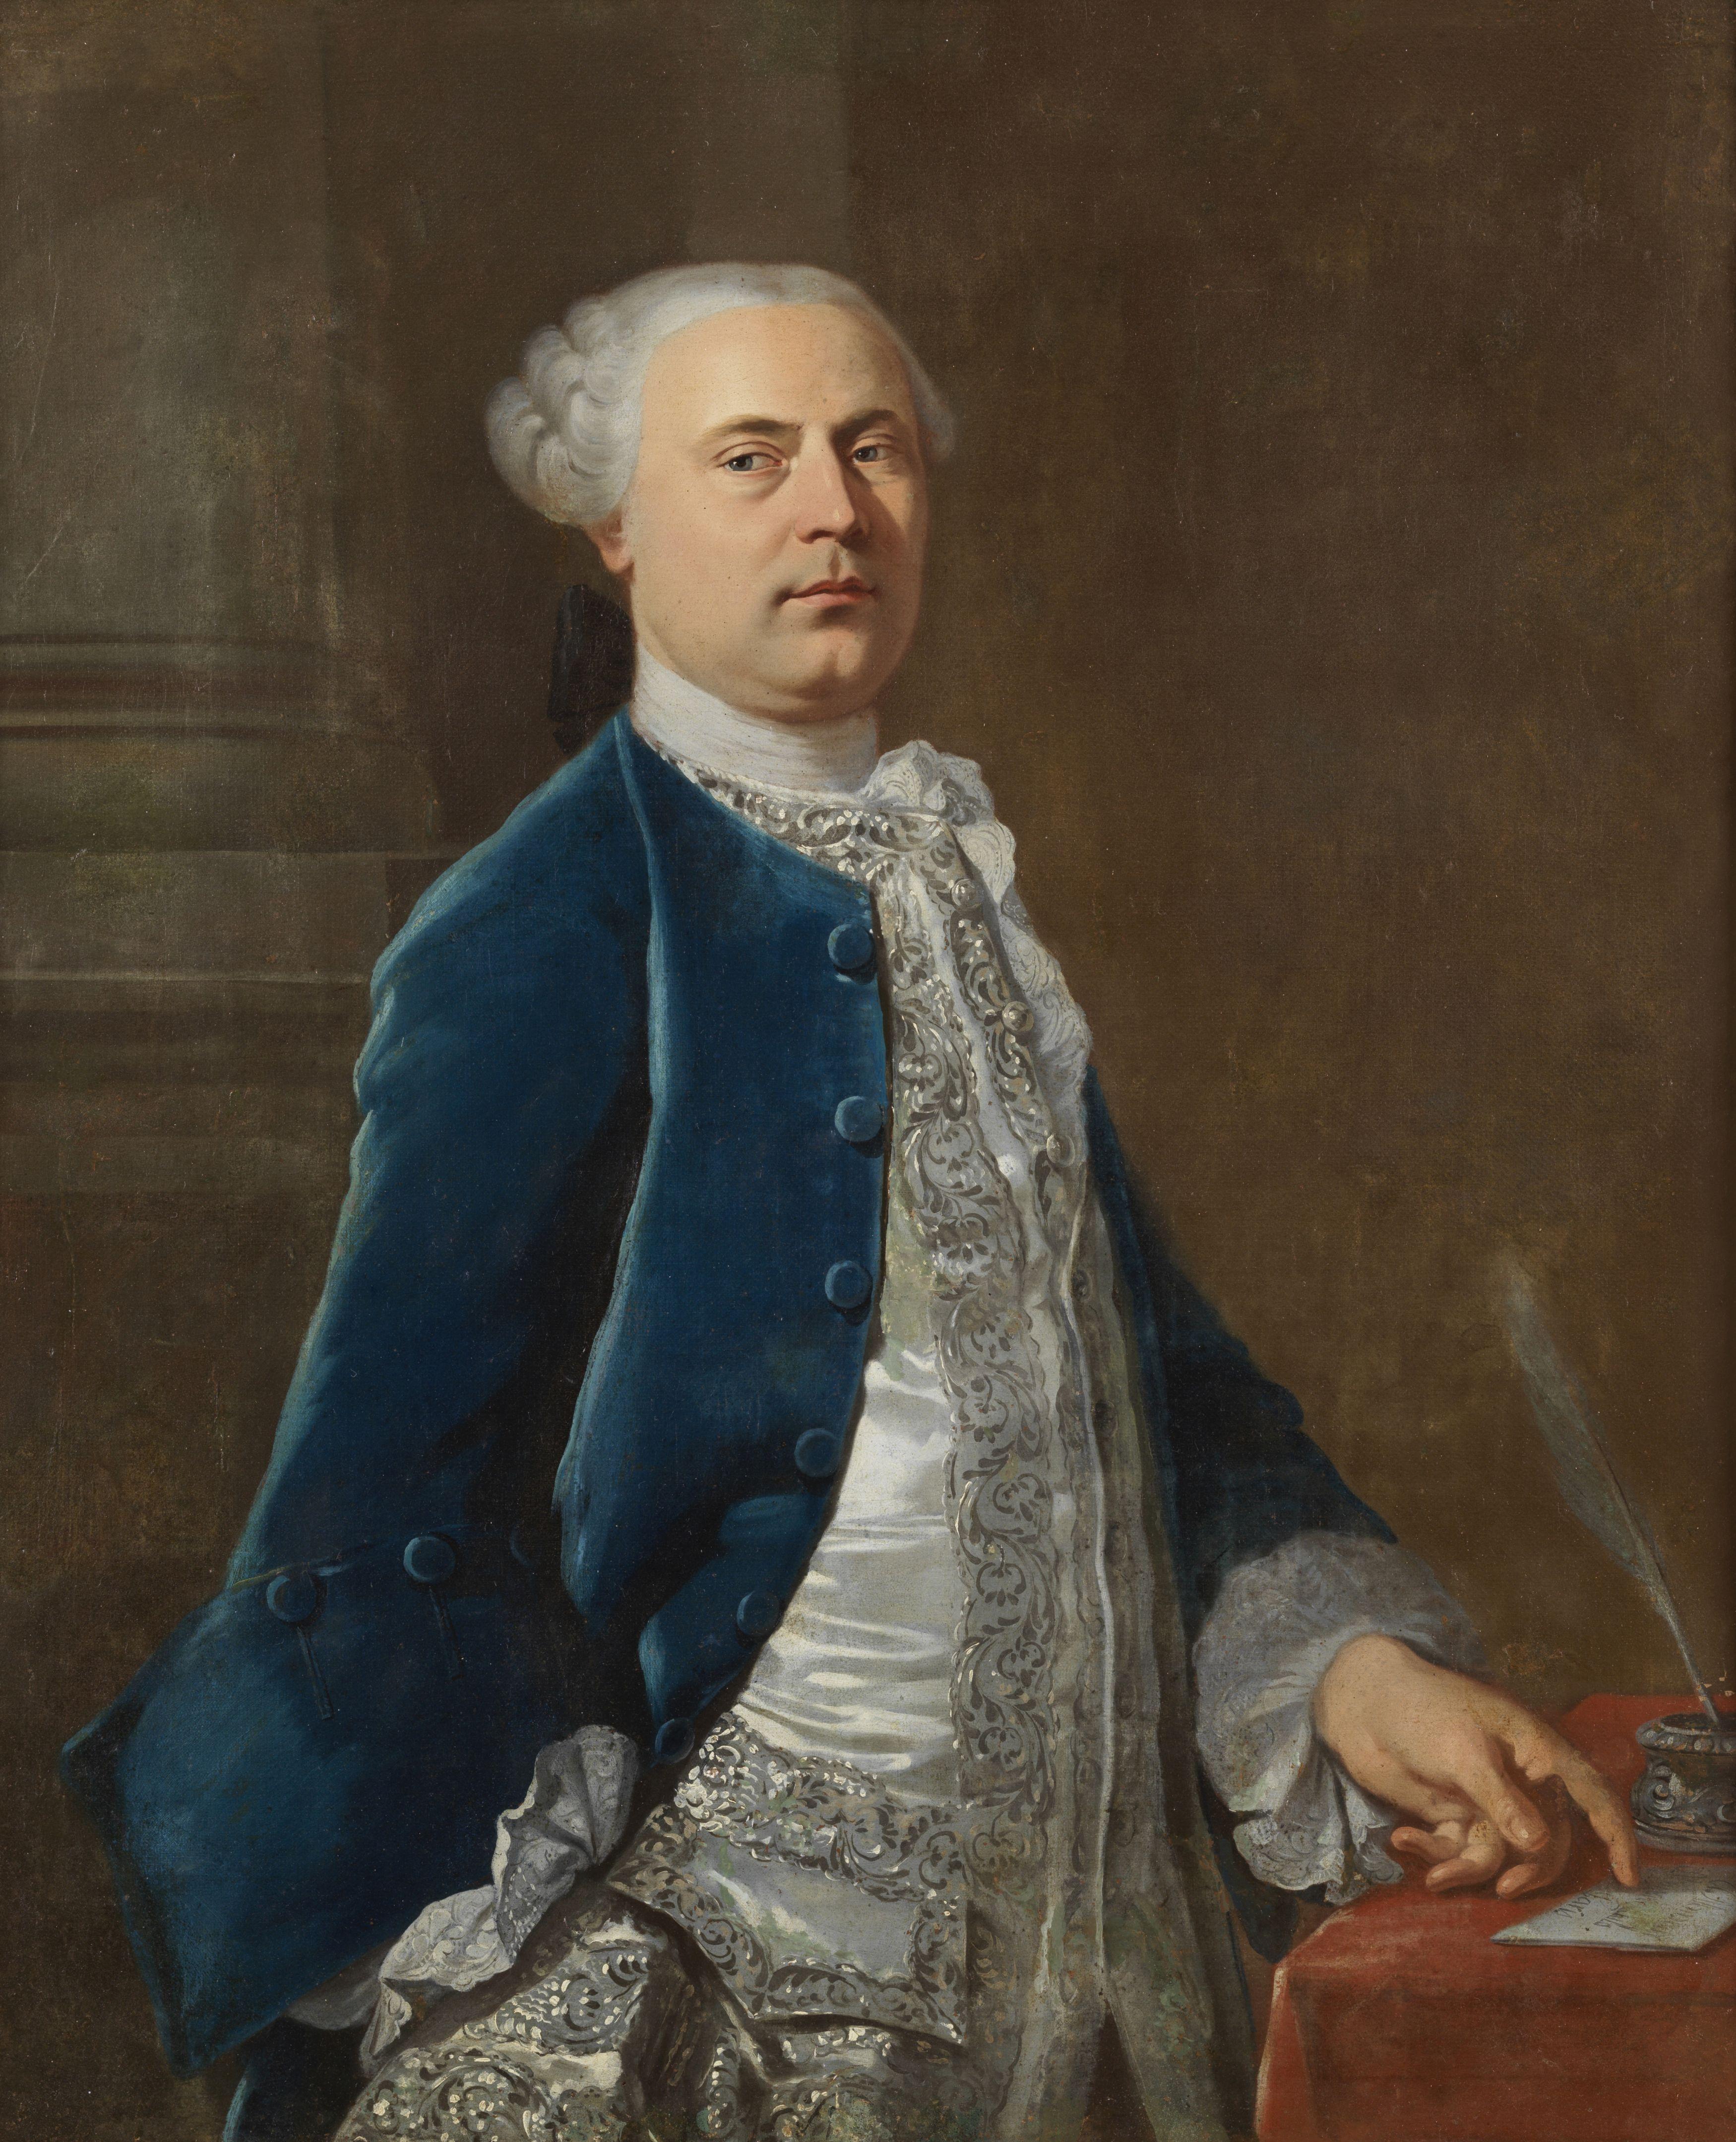 Unknown Portrait Painting - 18th Century Portrait of a Gentleman French School Man Oil on Canvas Blue White